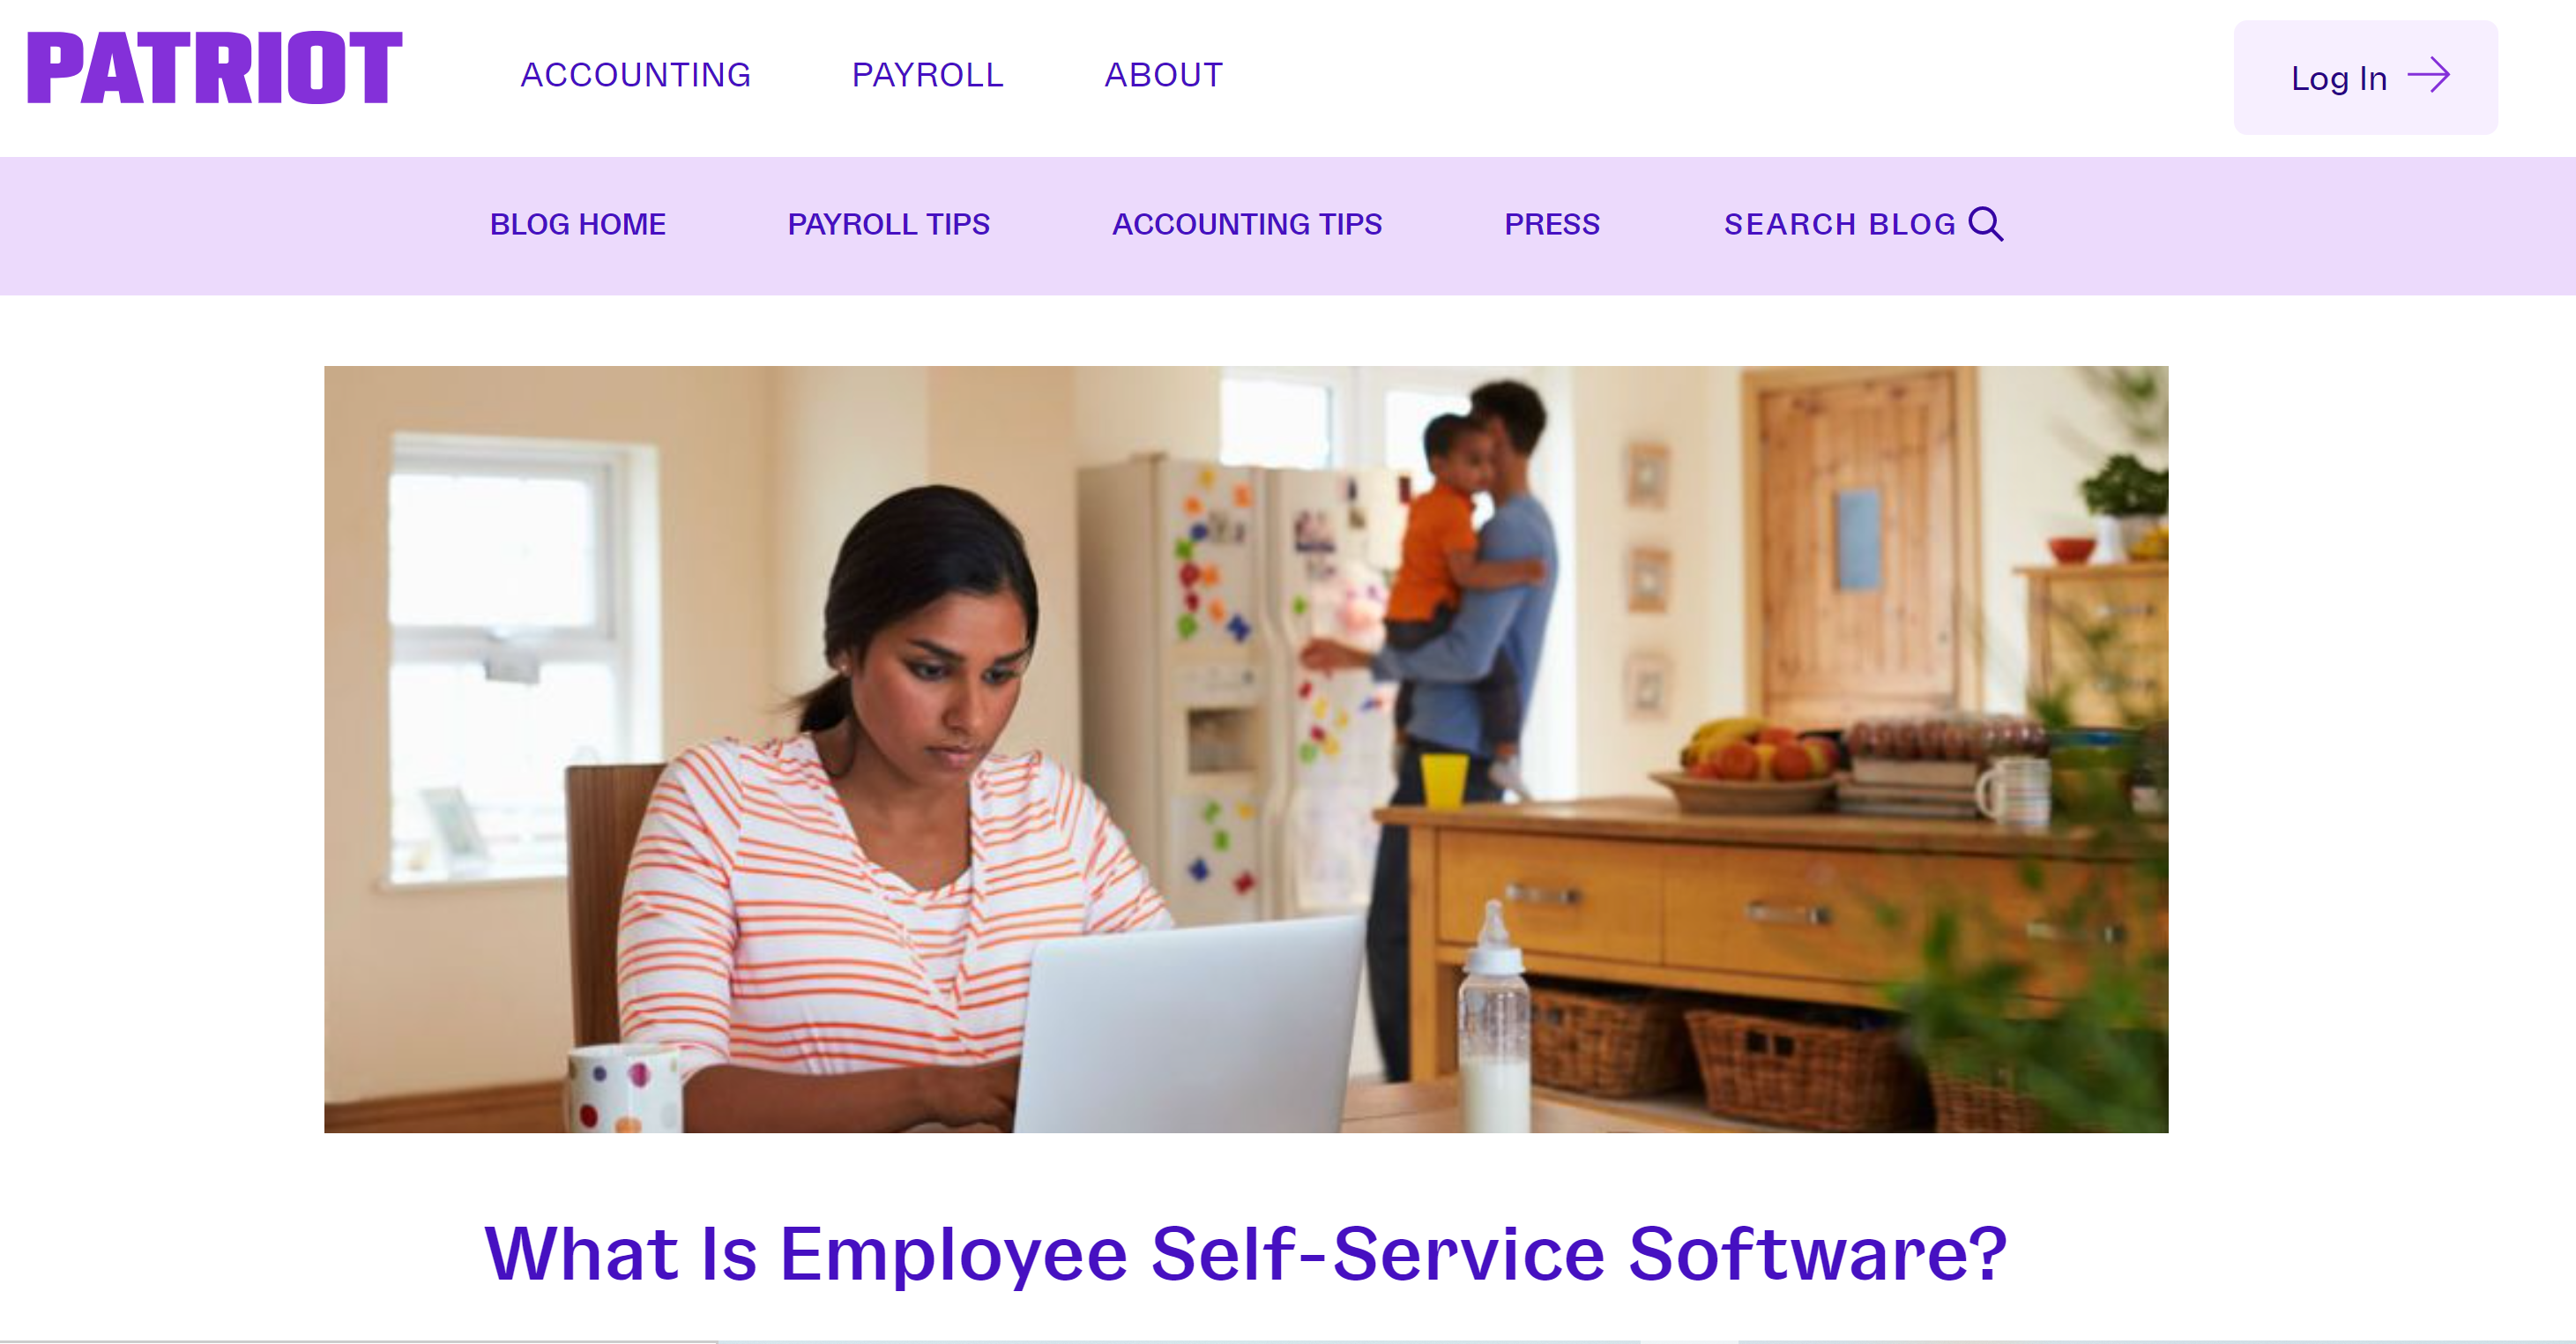 myPayroll Employee Self Service Portal - View Your Paystub details